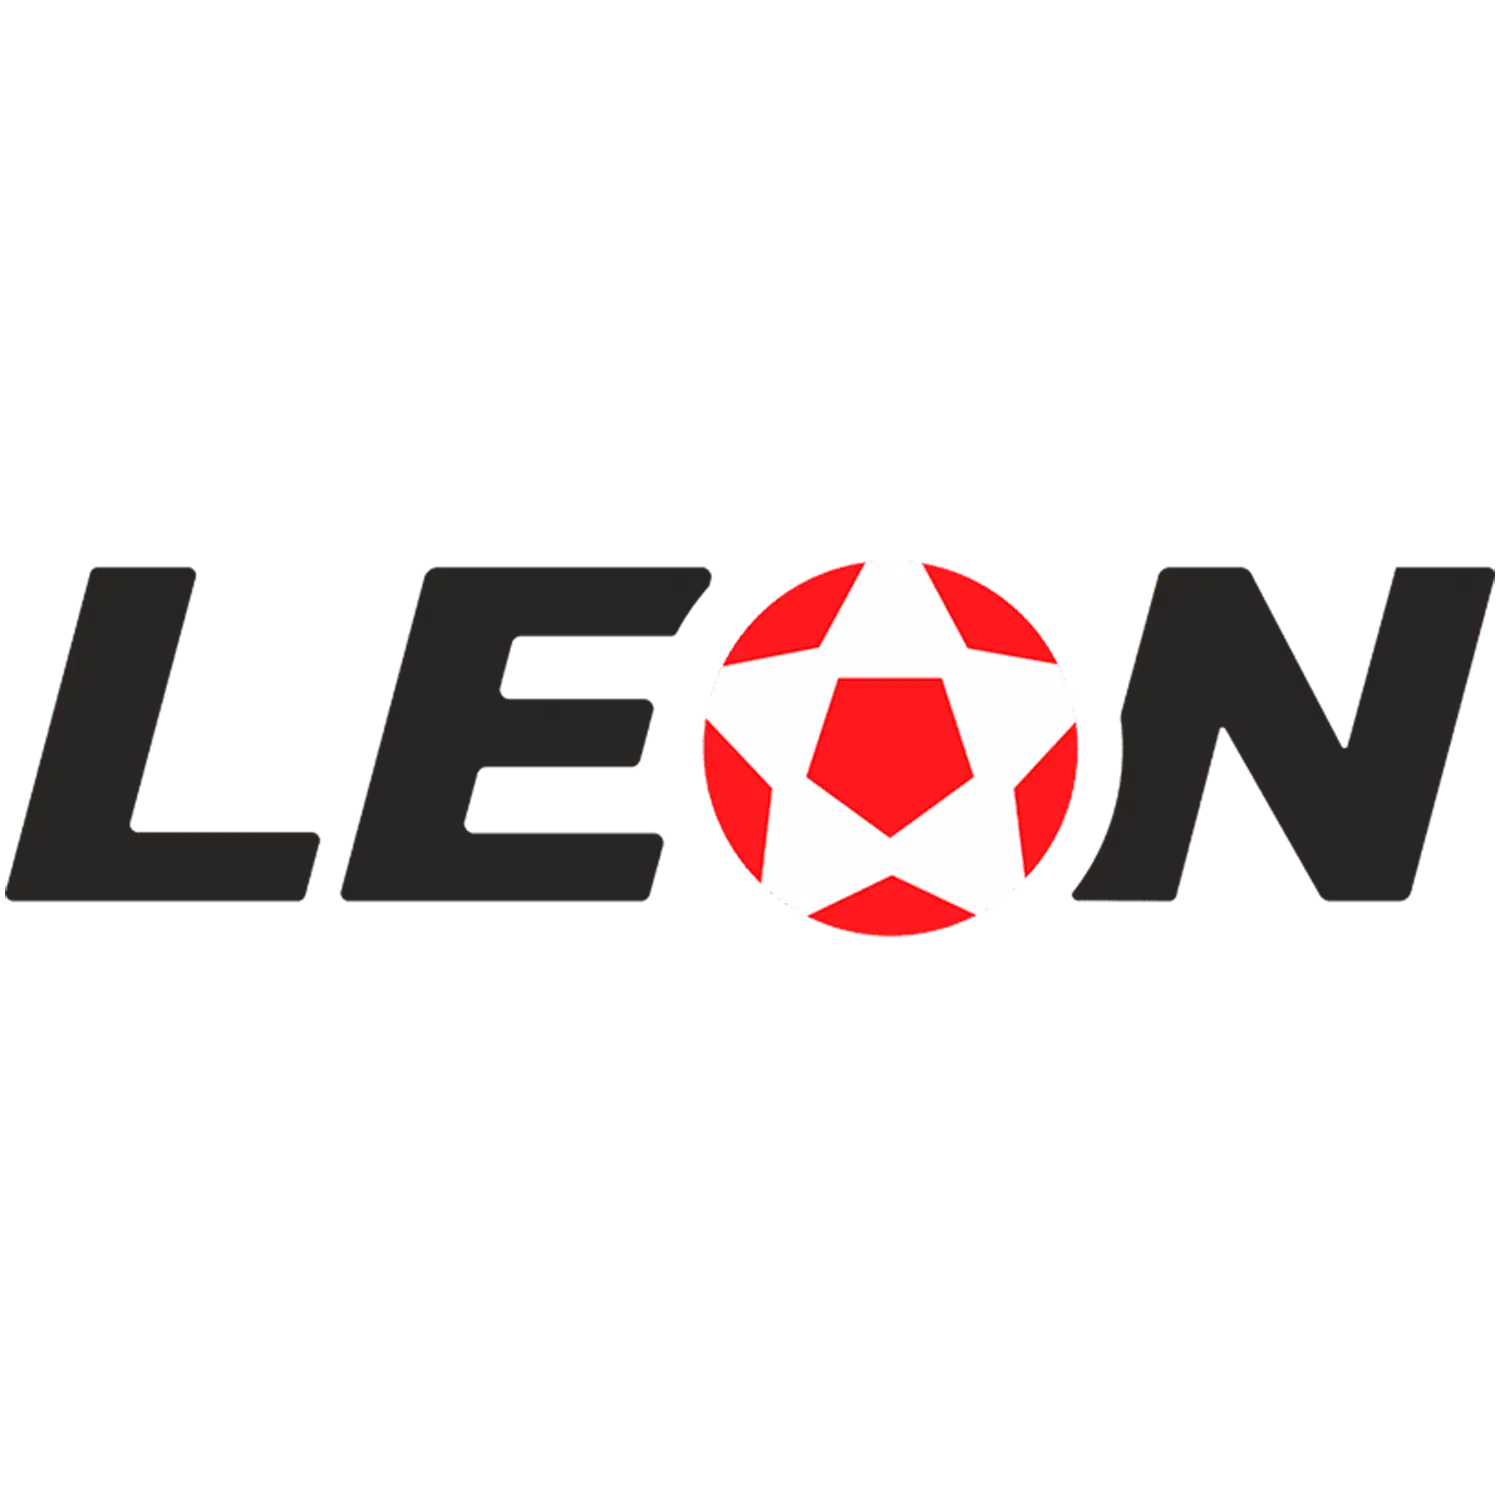 Leon Bet official betting site.